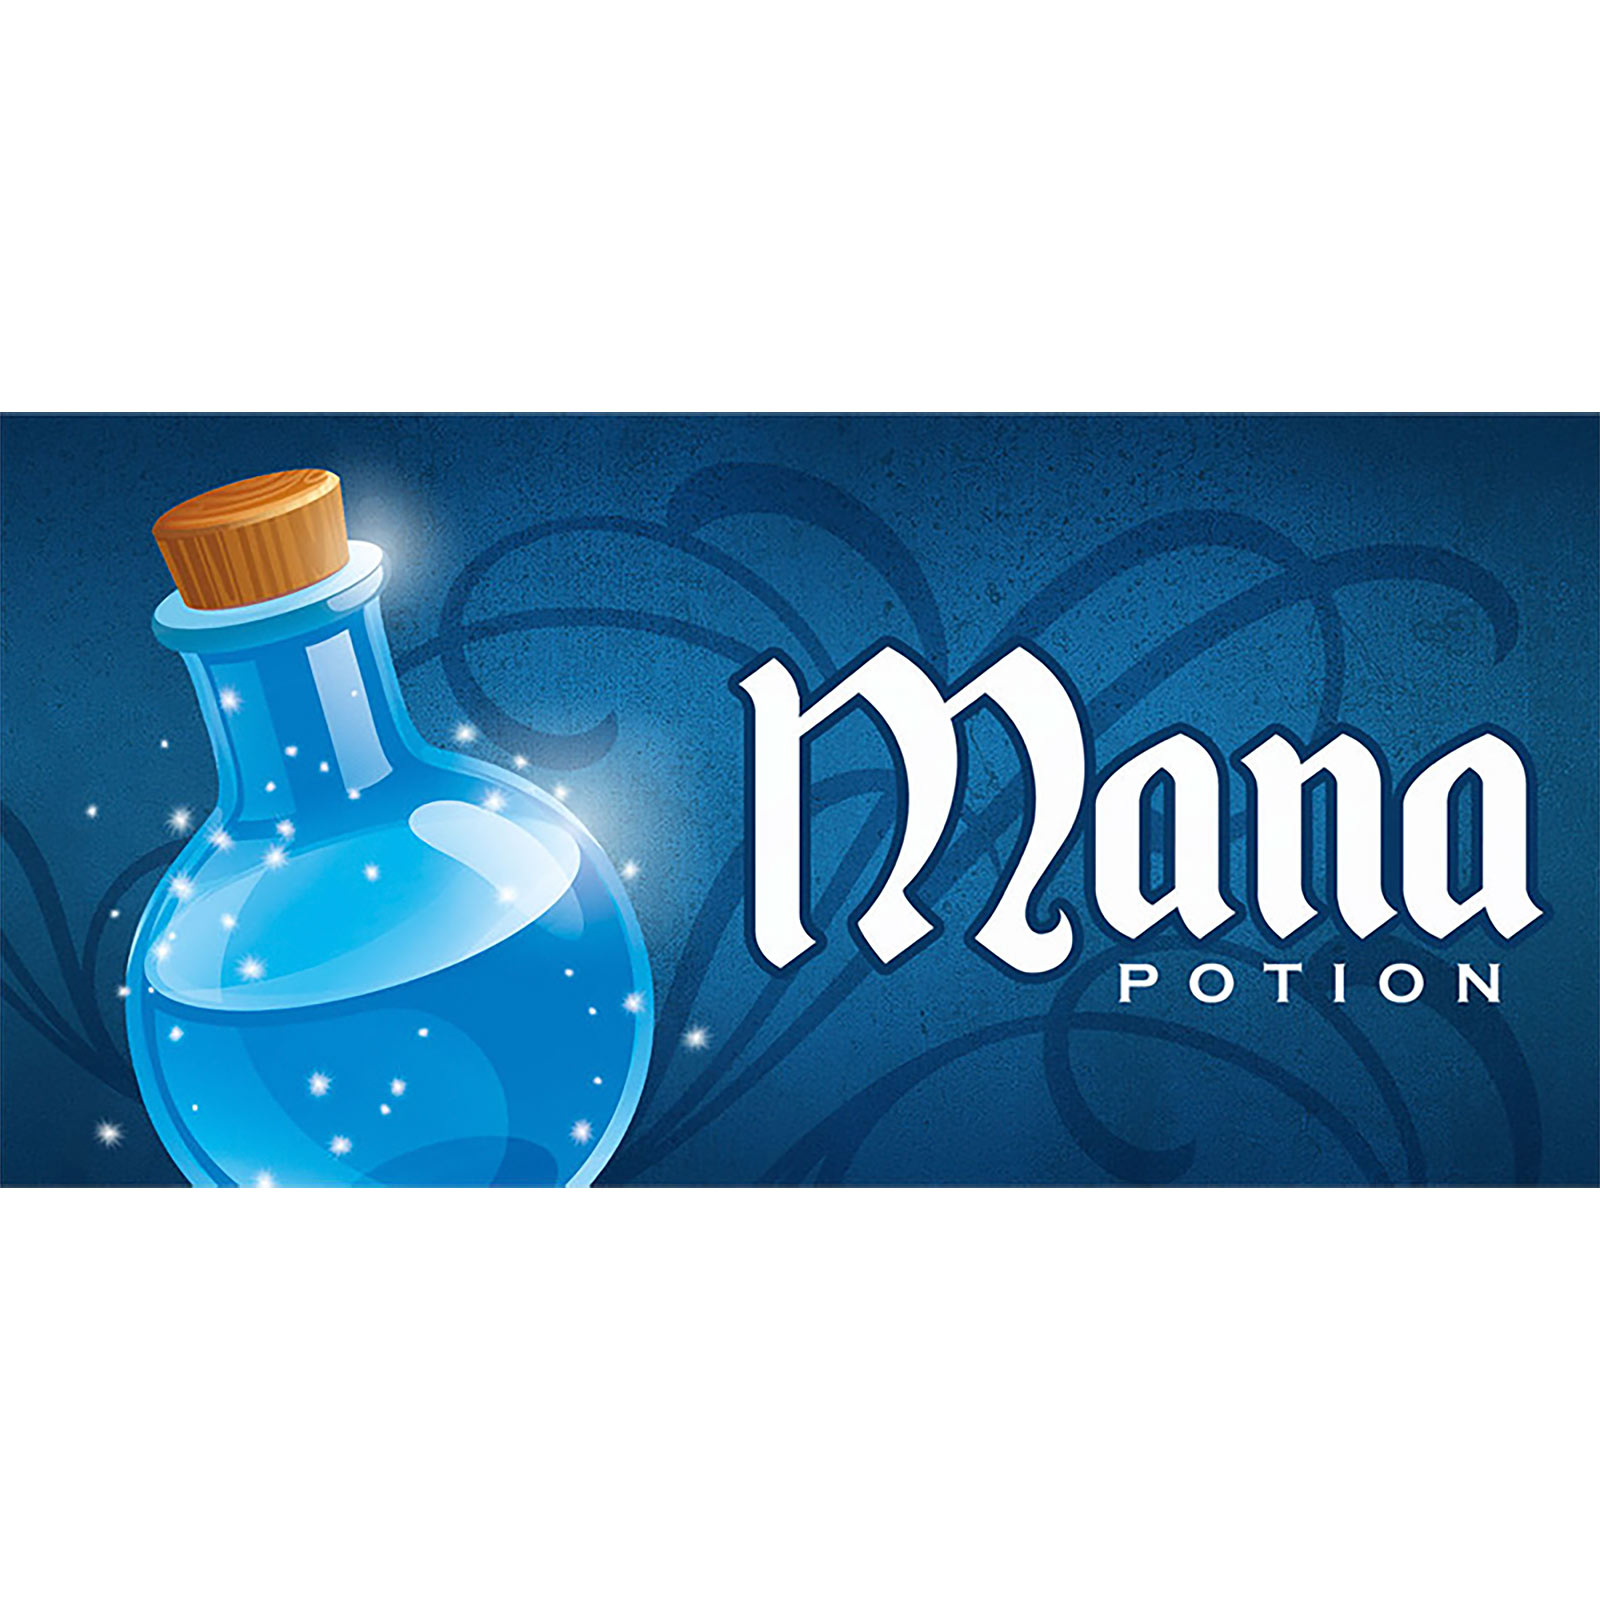 Mana Potion Mok voor Gaming Fans